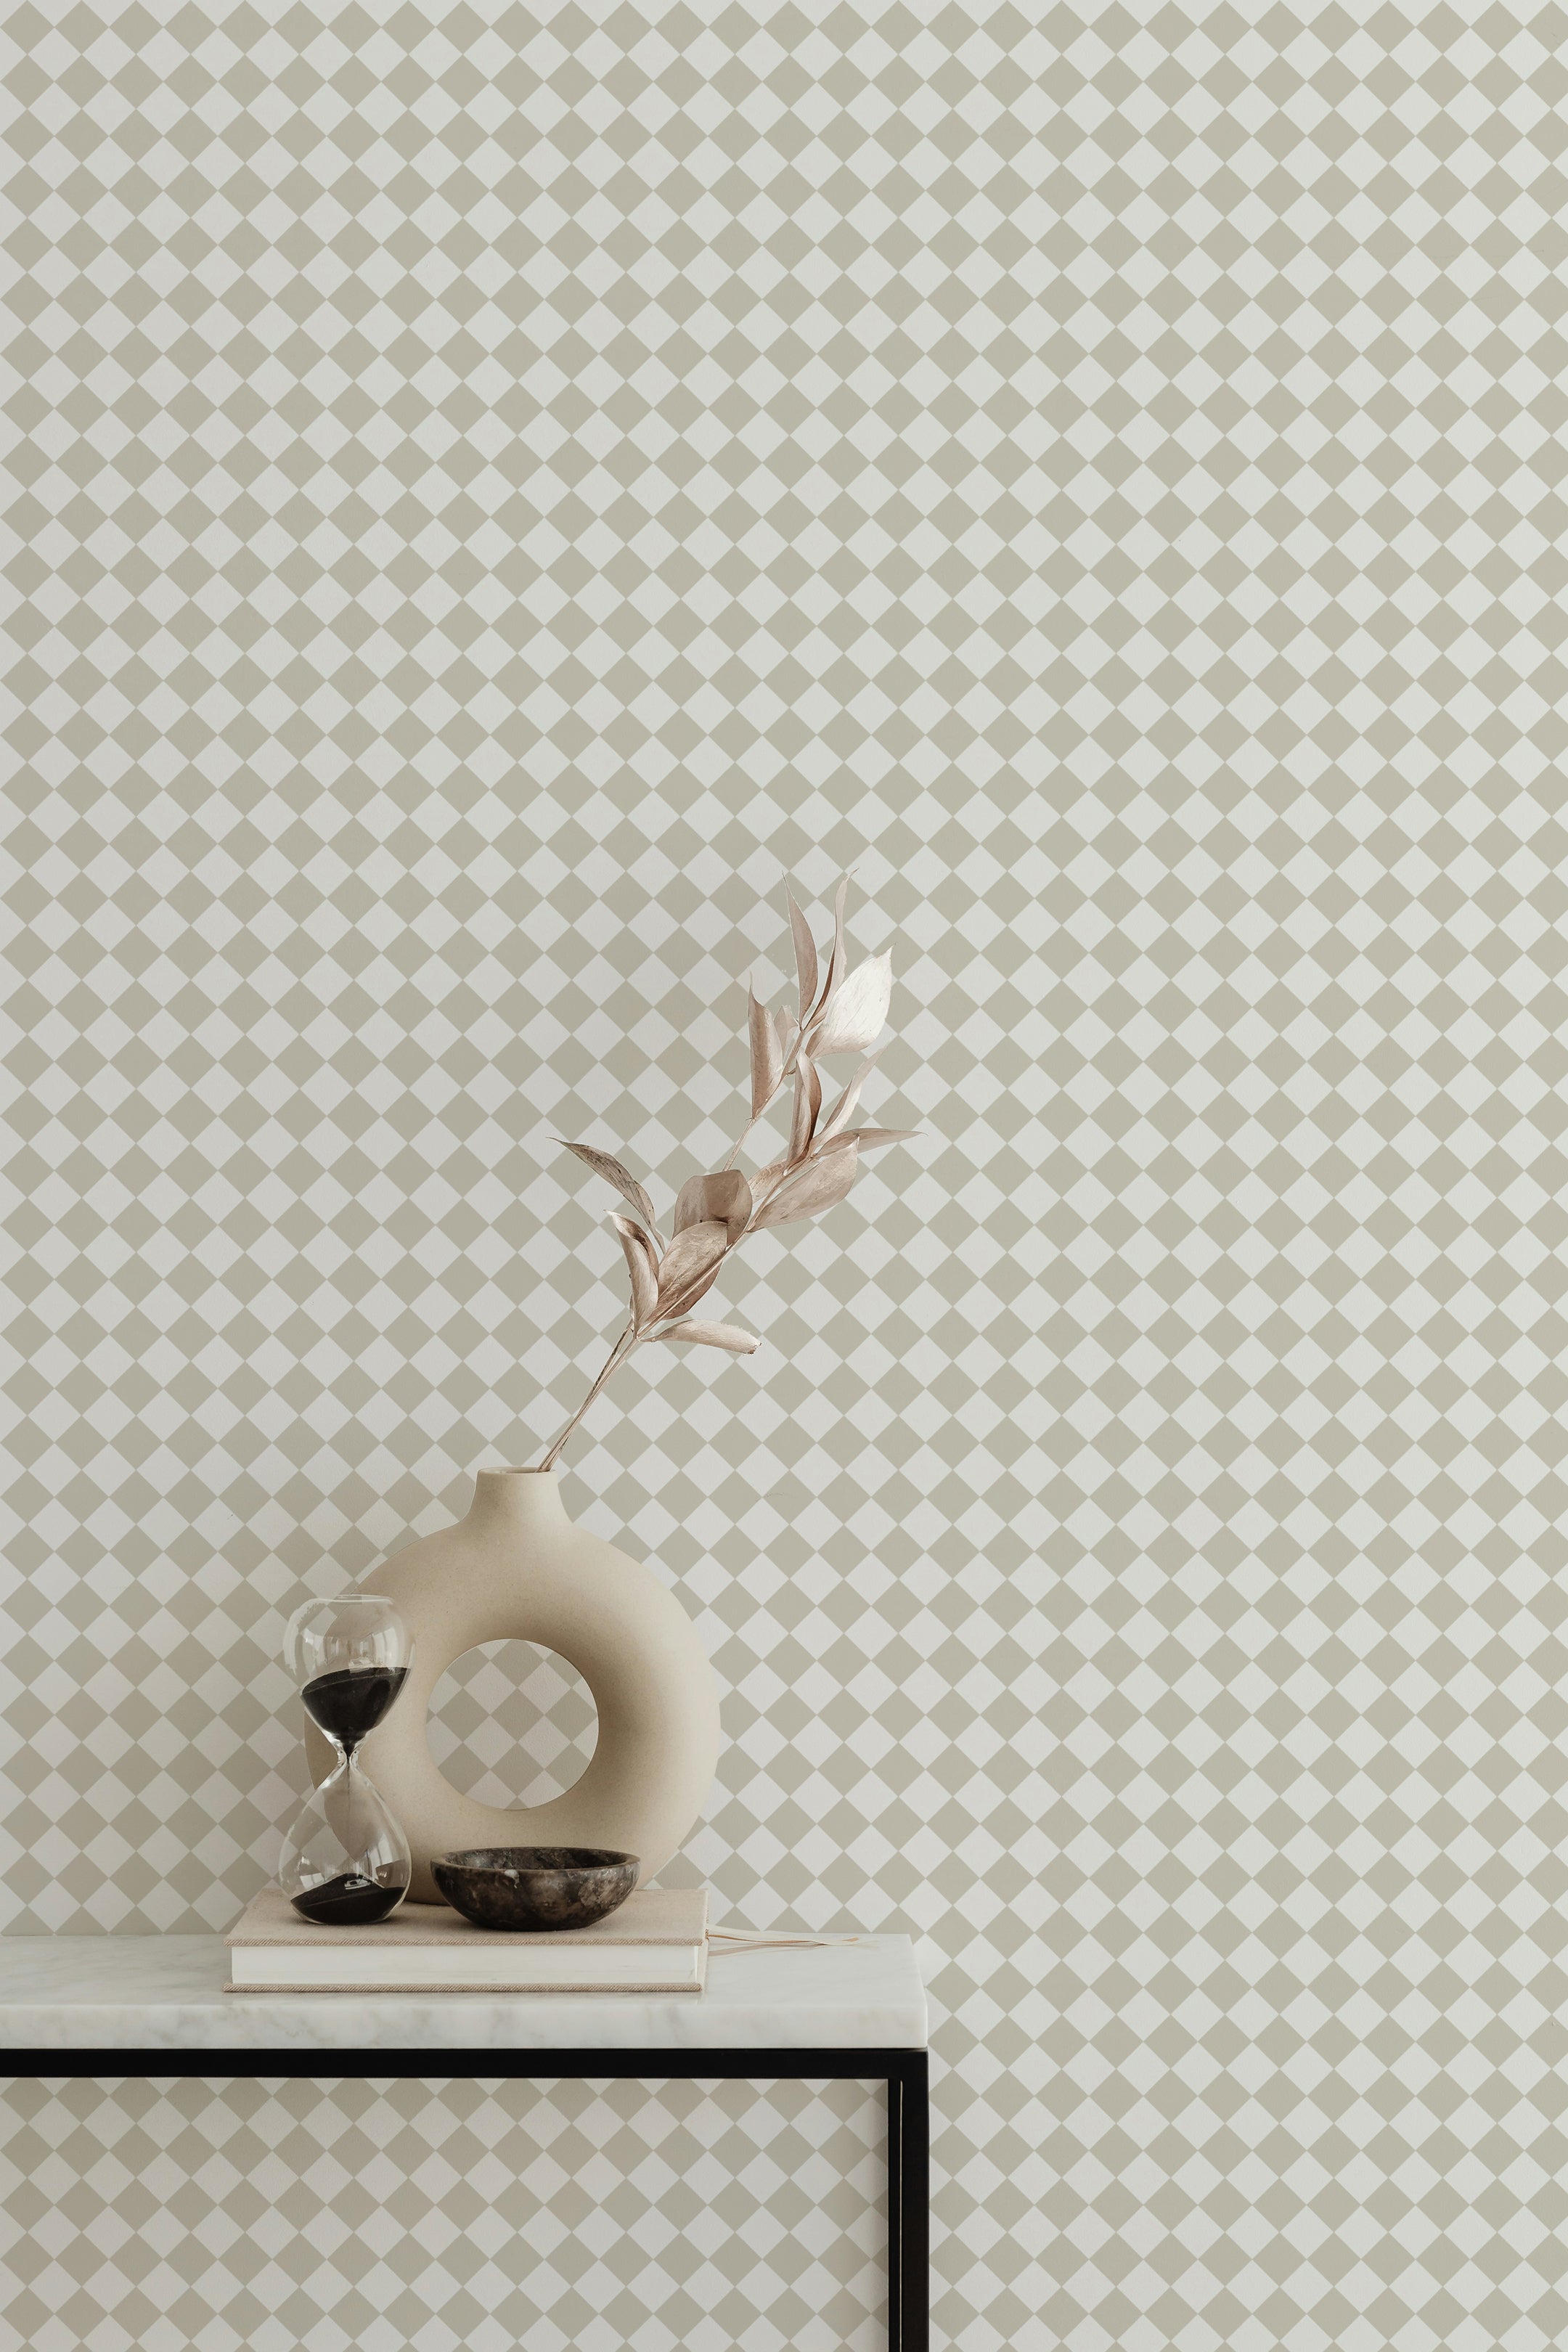 A stylish decor arrangement with a beige sculptural vase holding a dried leaf stem, an hourglass, and a small bowl placed on a white surface. The wall behind features beige and white checkered wallpaper, enhancing the space with its classic and refined pattern